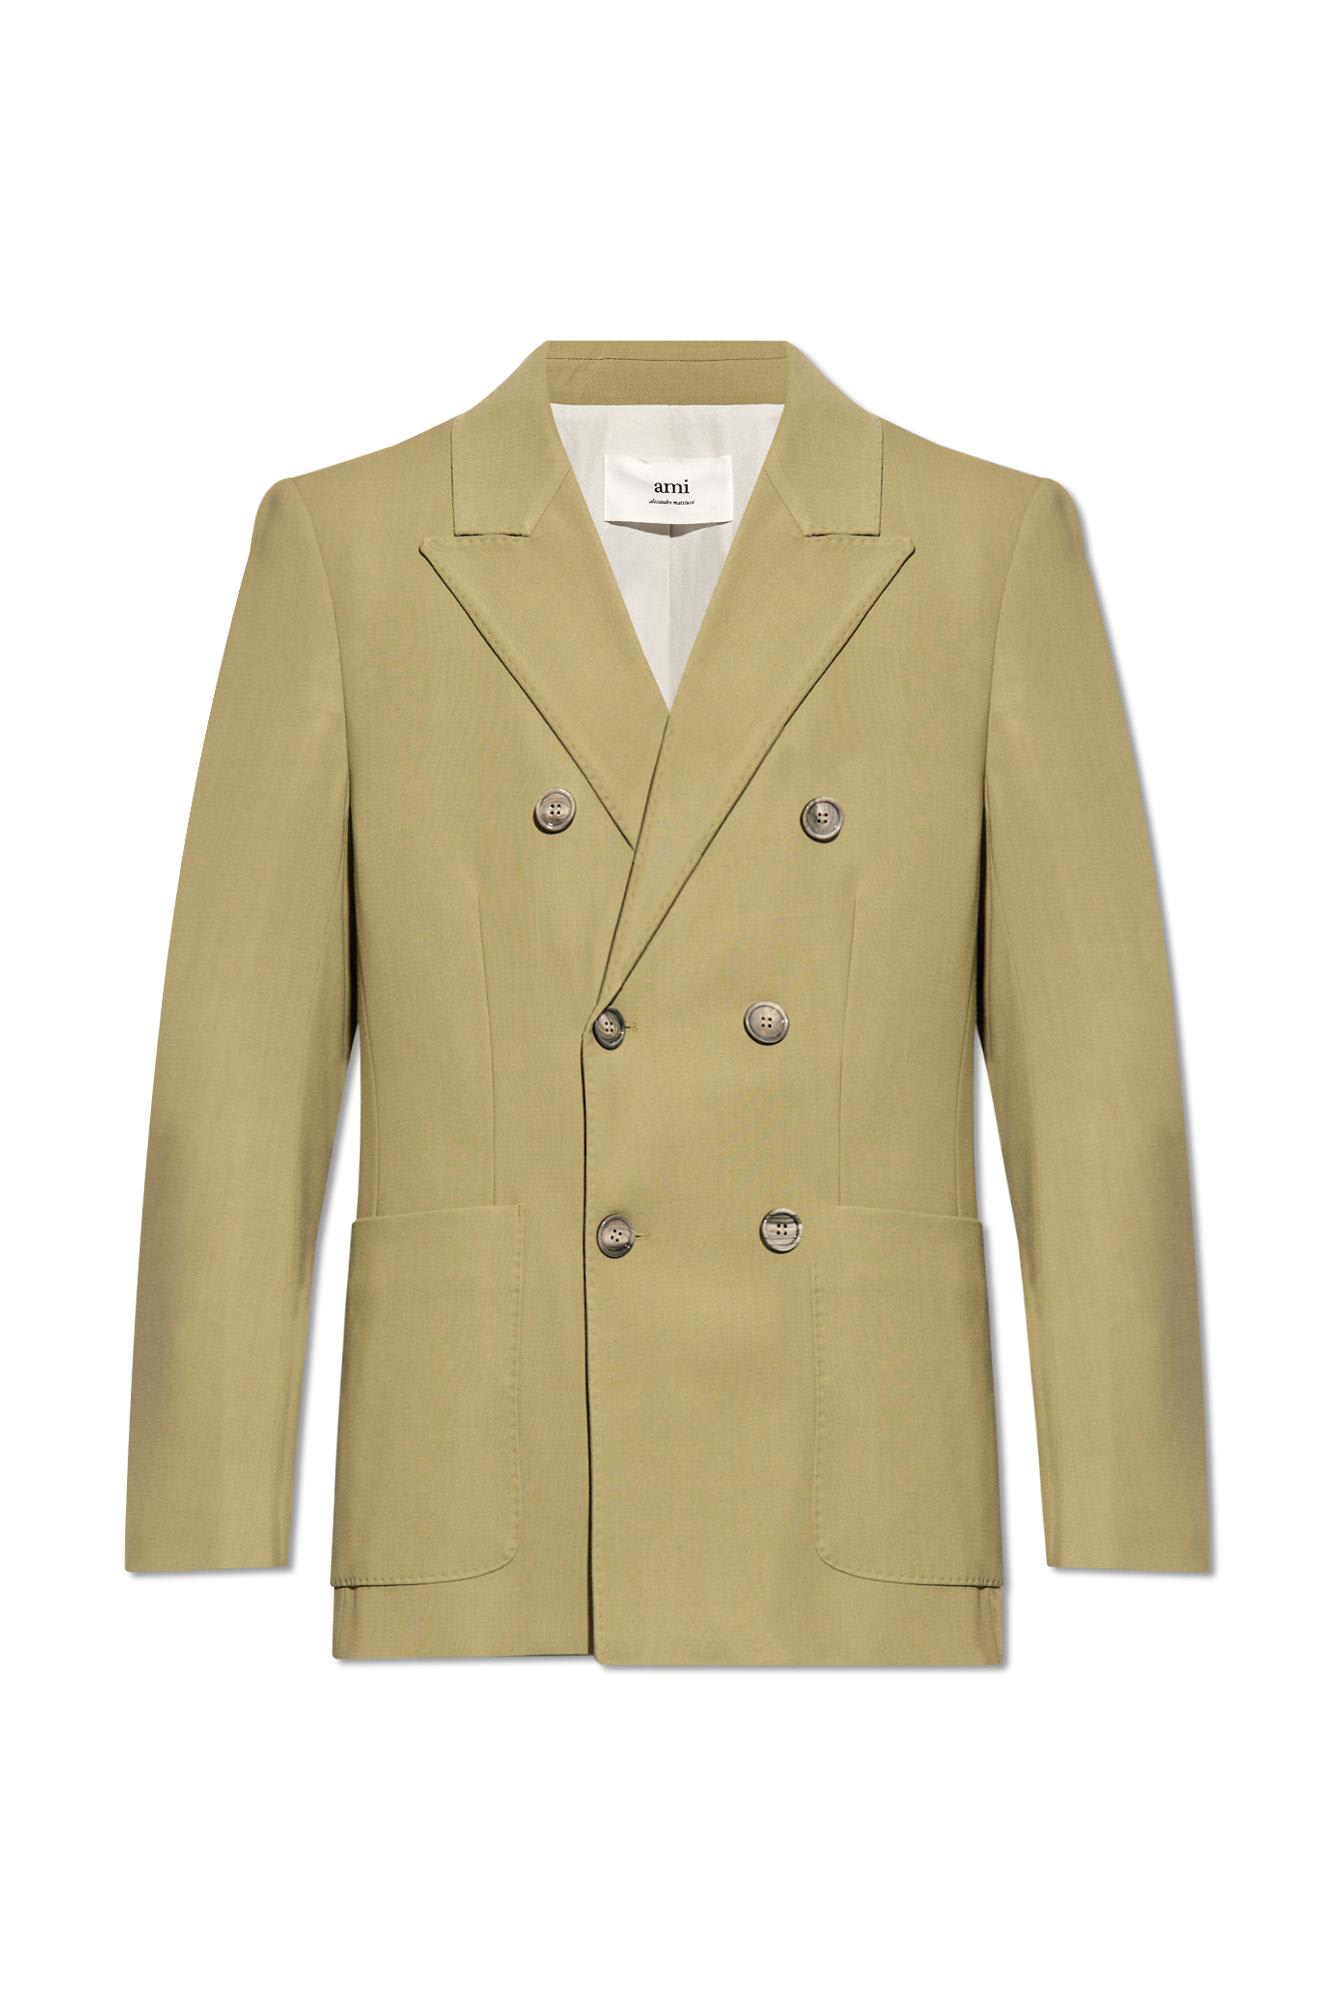 AMI ALEXANDRE MATTIUSSI AMI ALEXANDRE MATTIUSSI DOUBLE-BREASTED BLAZER